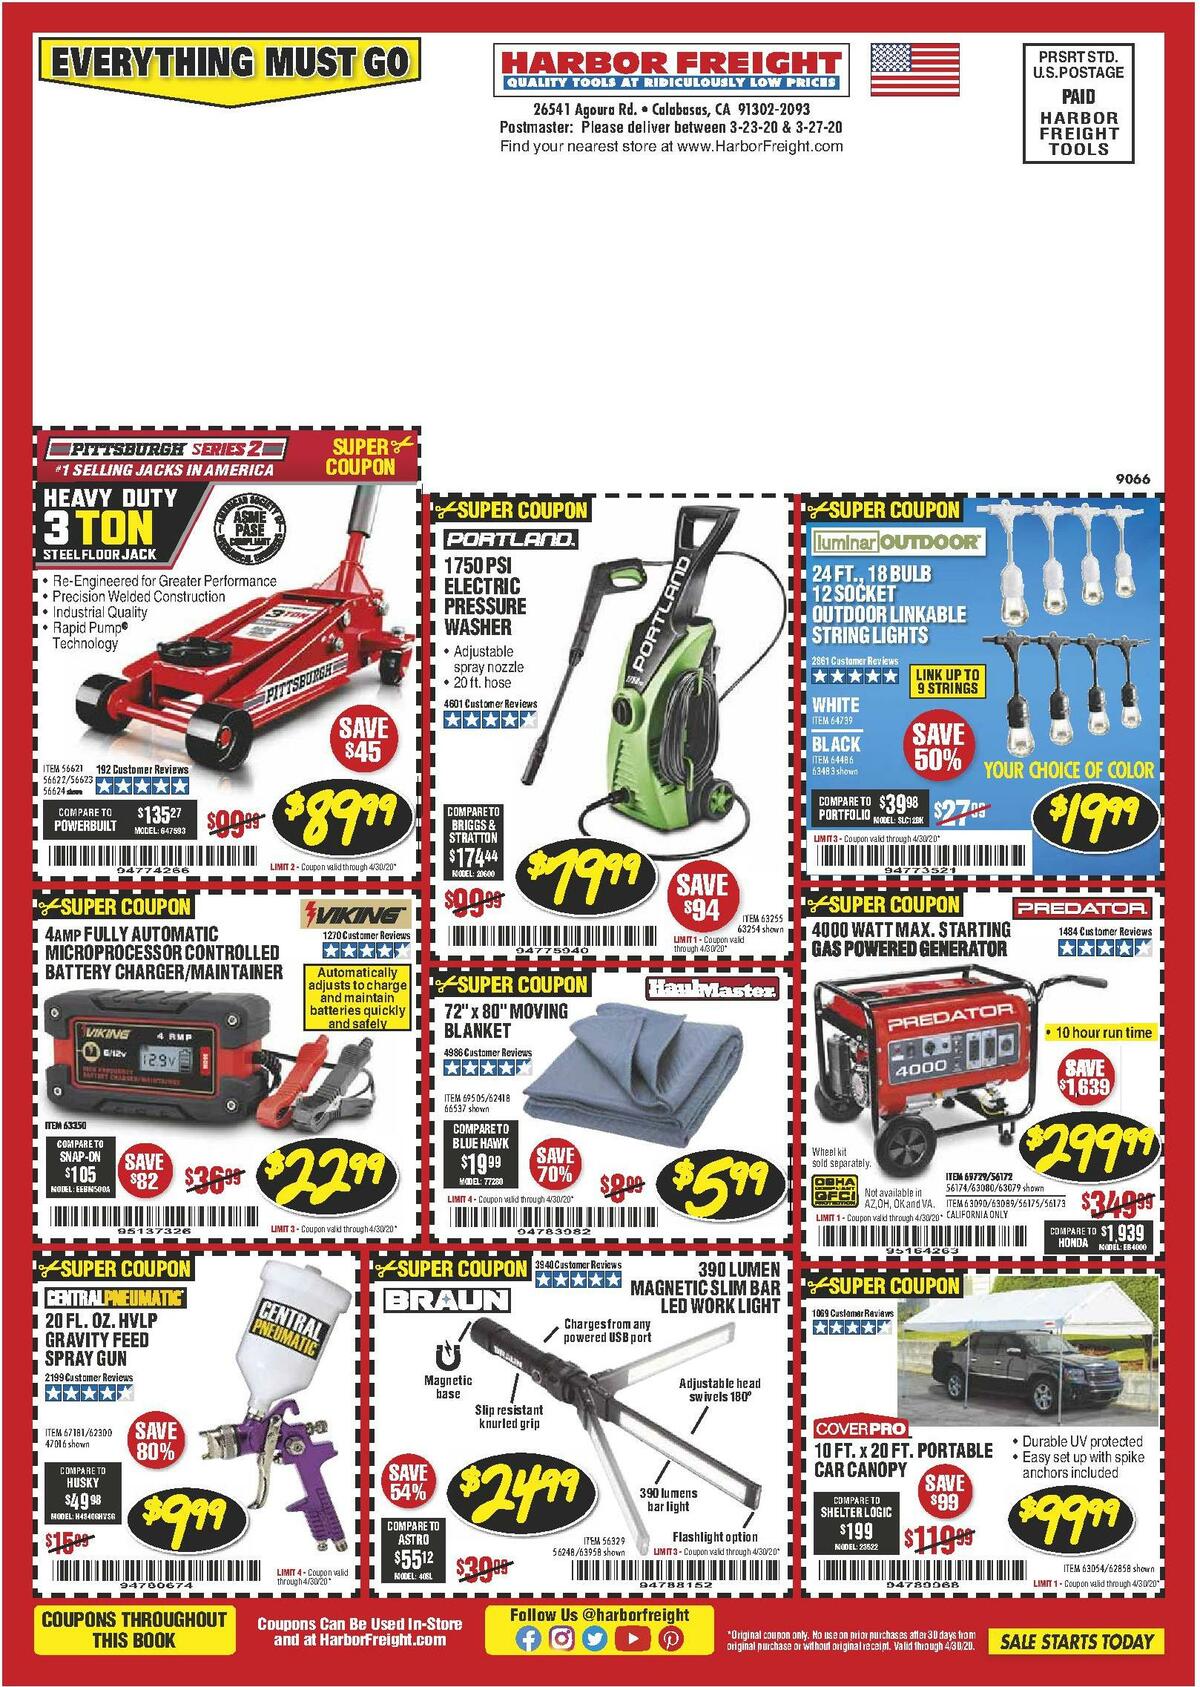 Harbor Freight Tools Weekly Ad from April 1